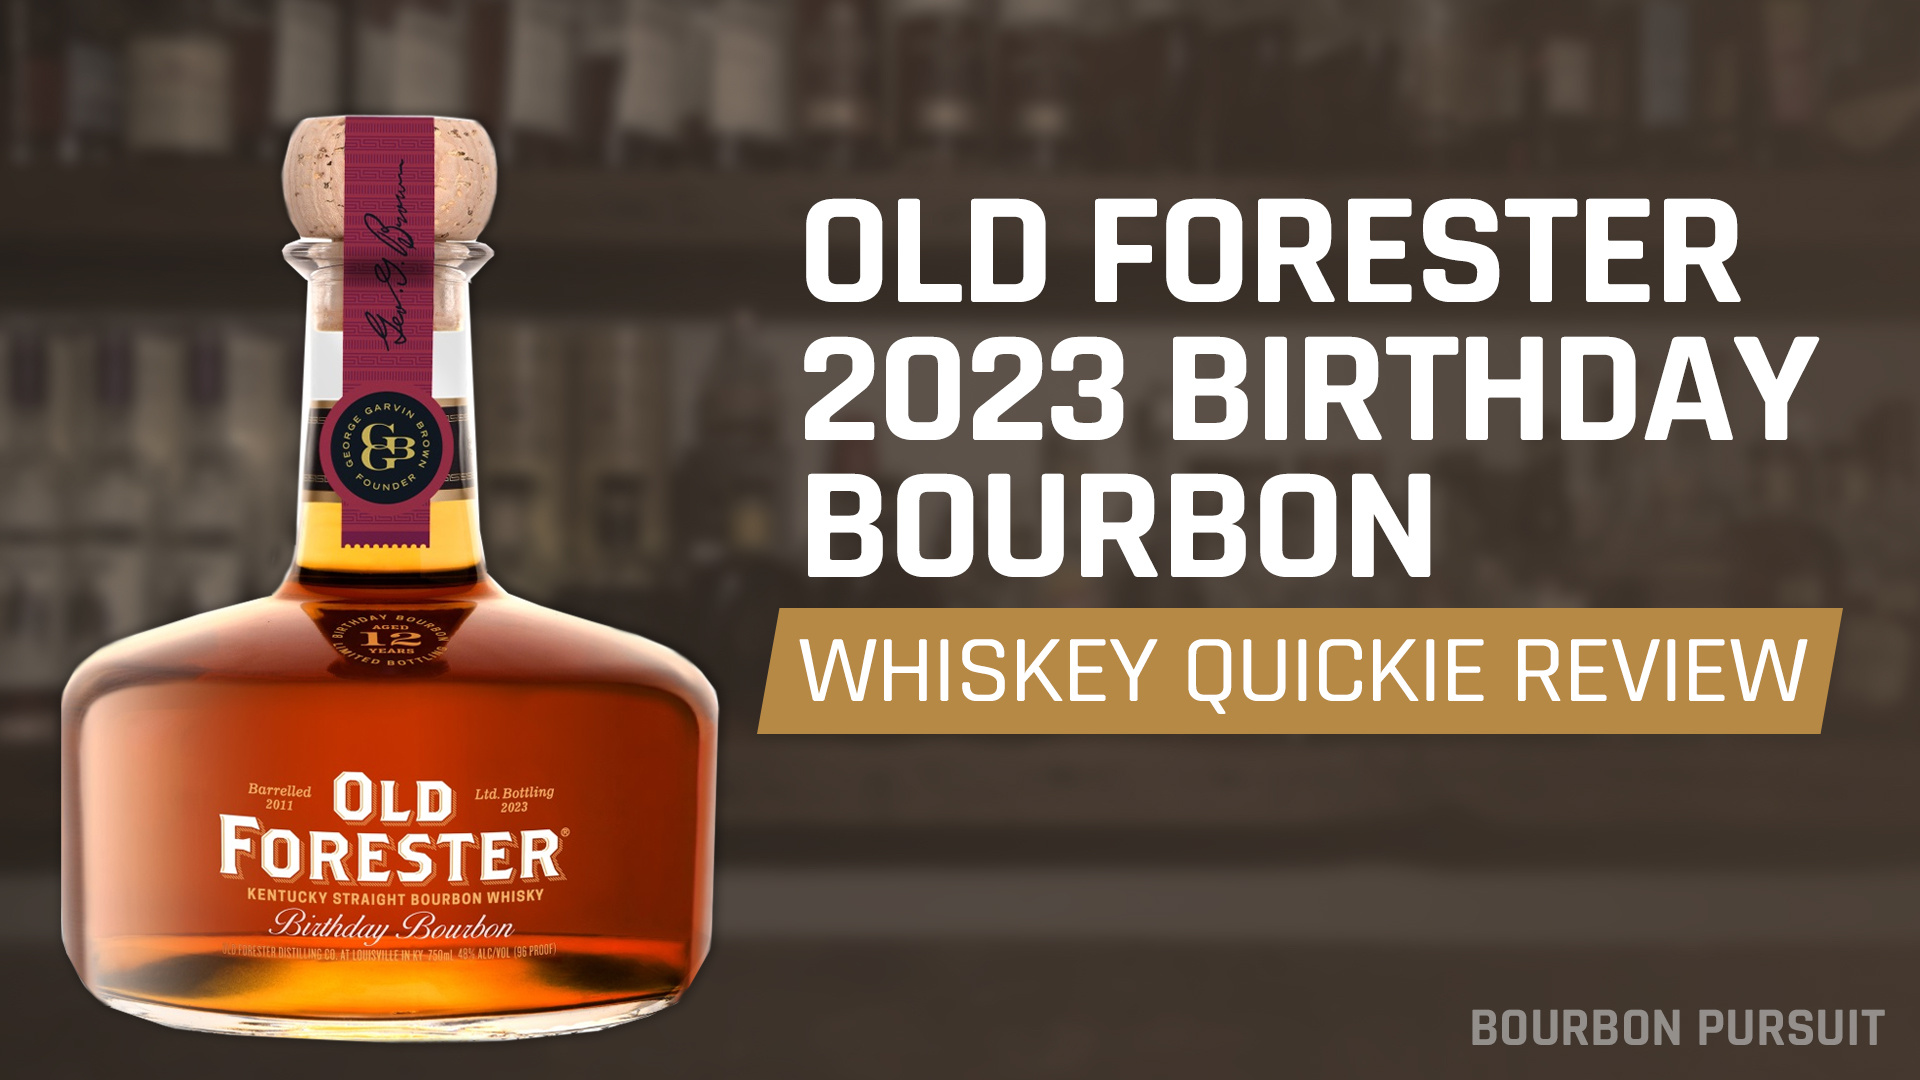 Whiskey Quickie Old Forester 2023 Birthday Bourbon Review BOURBON